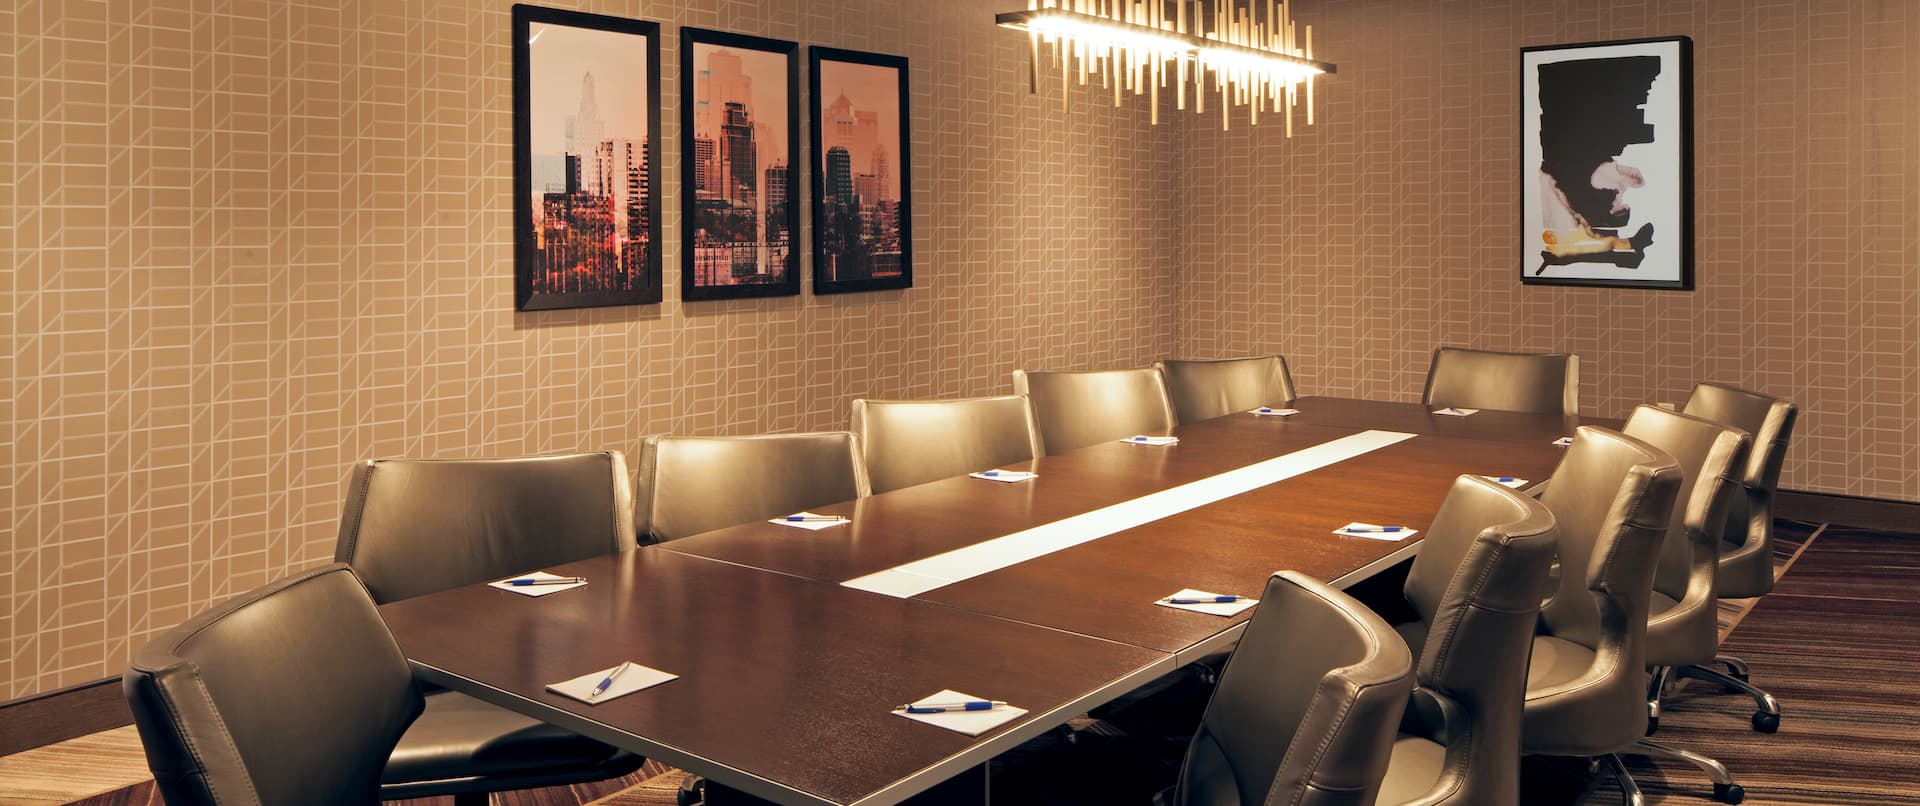 Boardroom Setup With Wall Art and Seating for Pp to 12 People